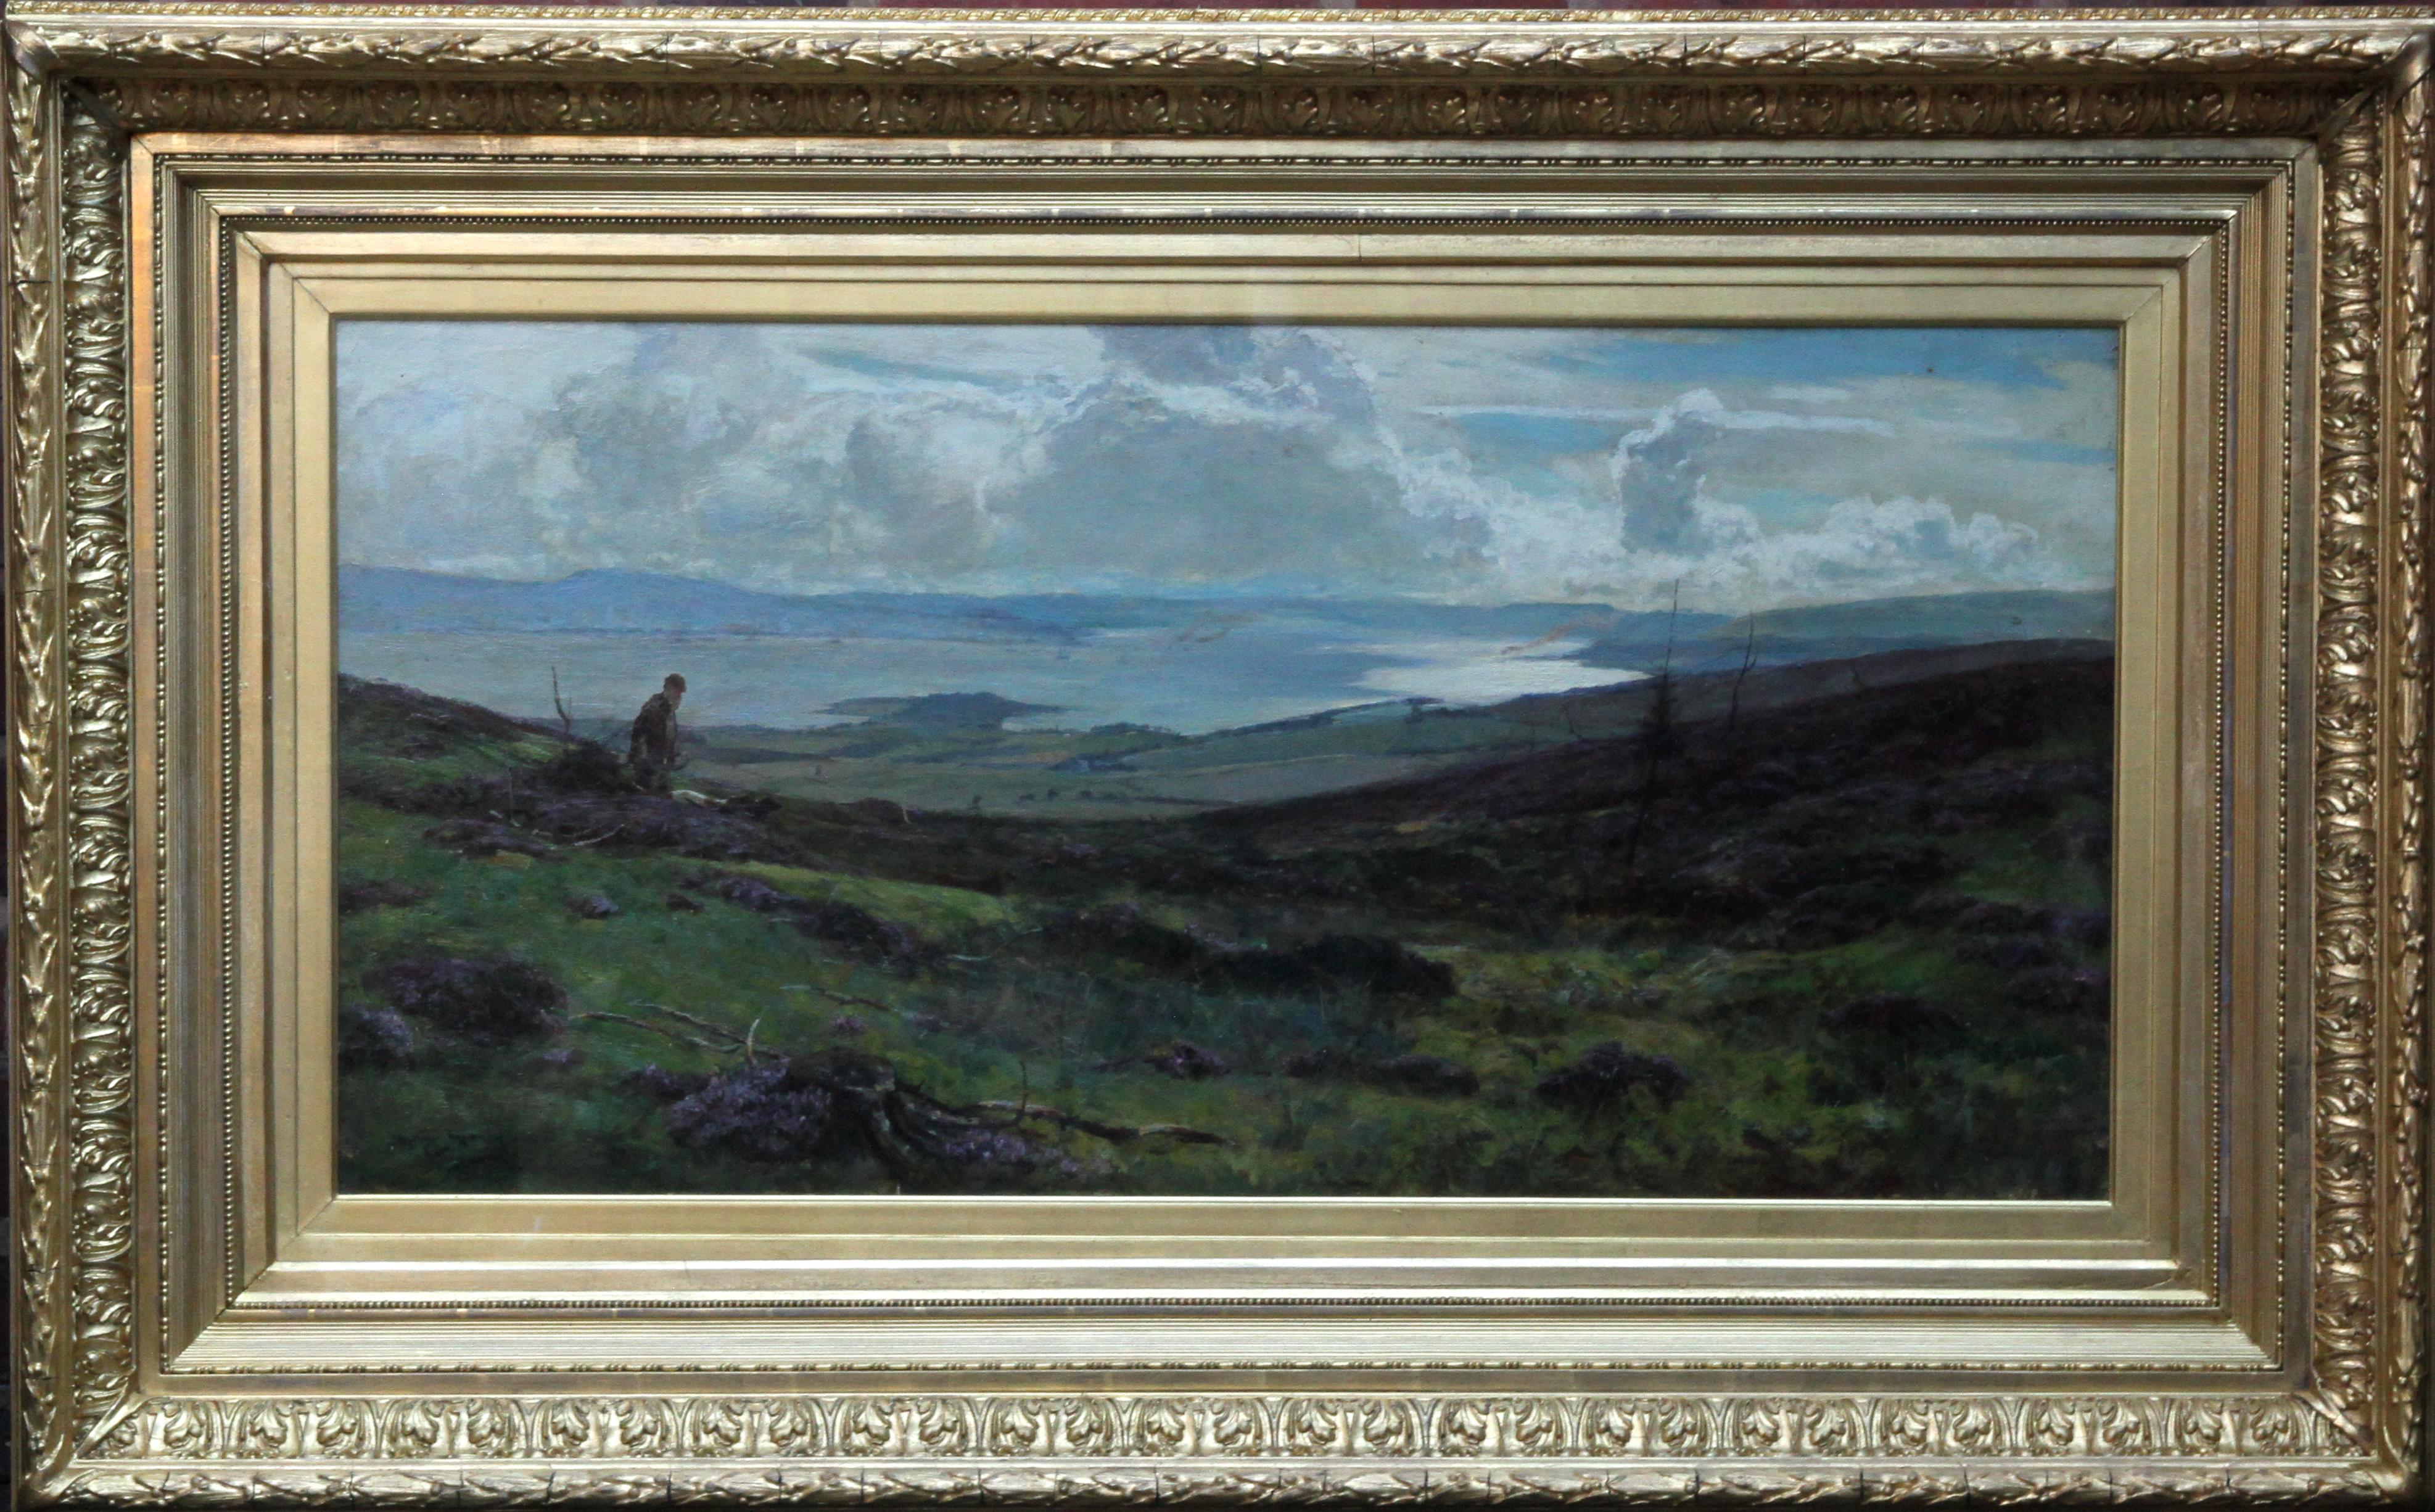 Sir David Murray Landscape Painting - The Clyde from Darleith Moor above Cardross - Scottish art Victorian landscape